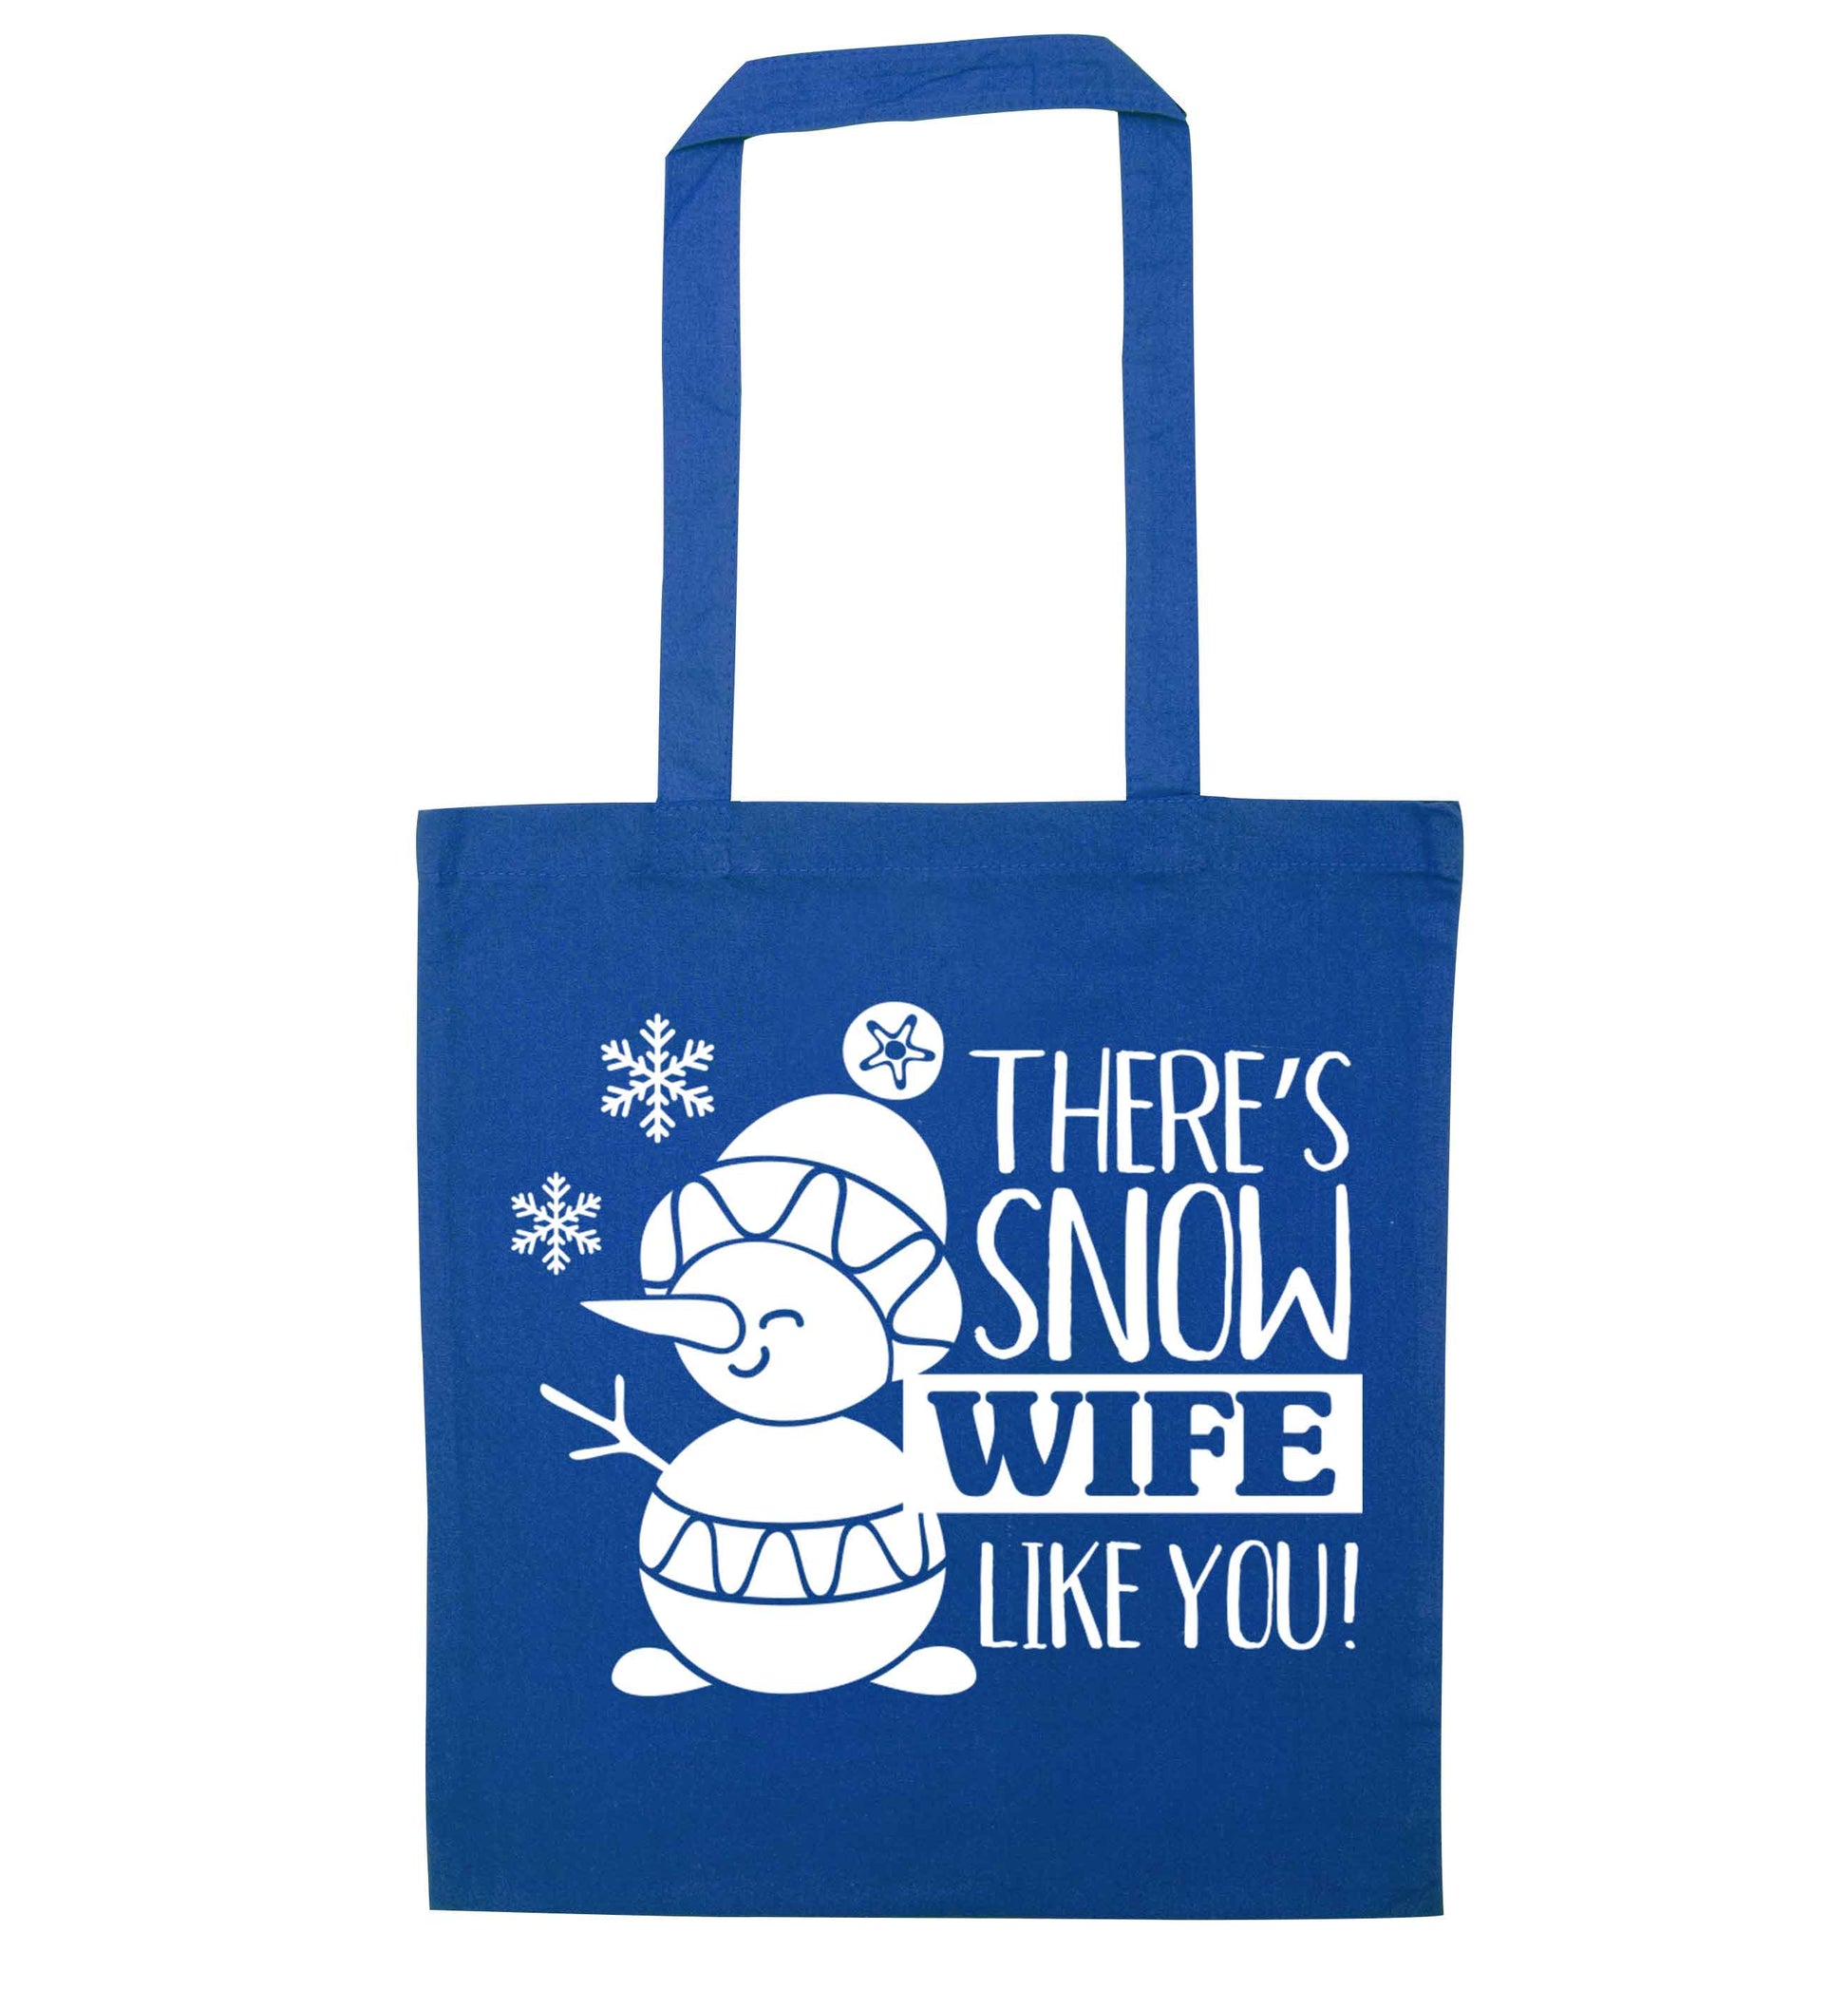 There's snow wife like you blue tote bag